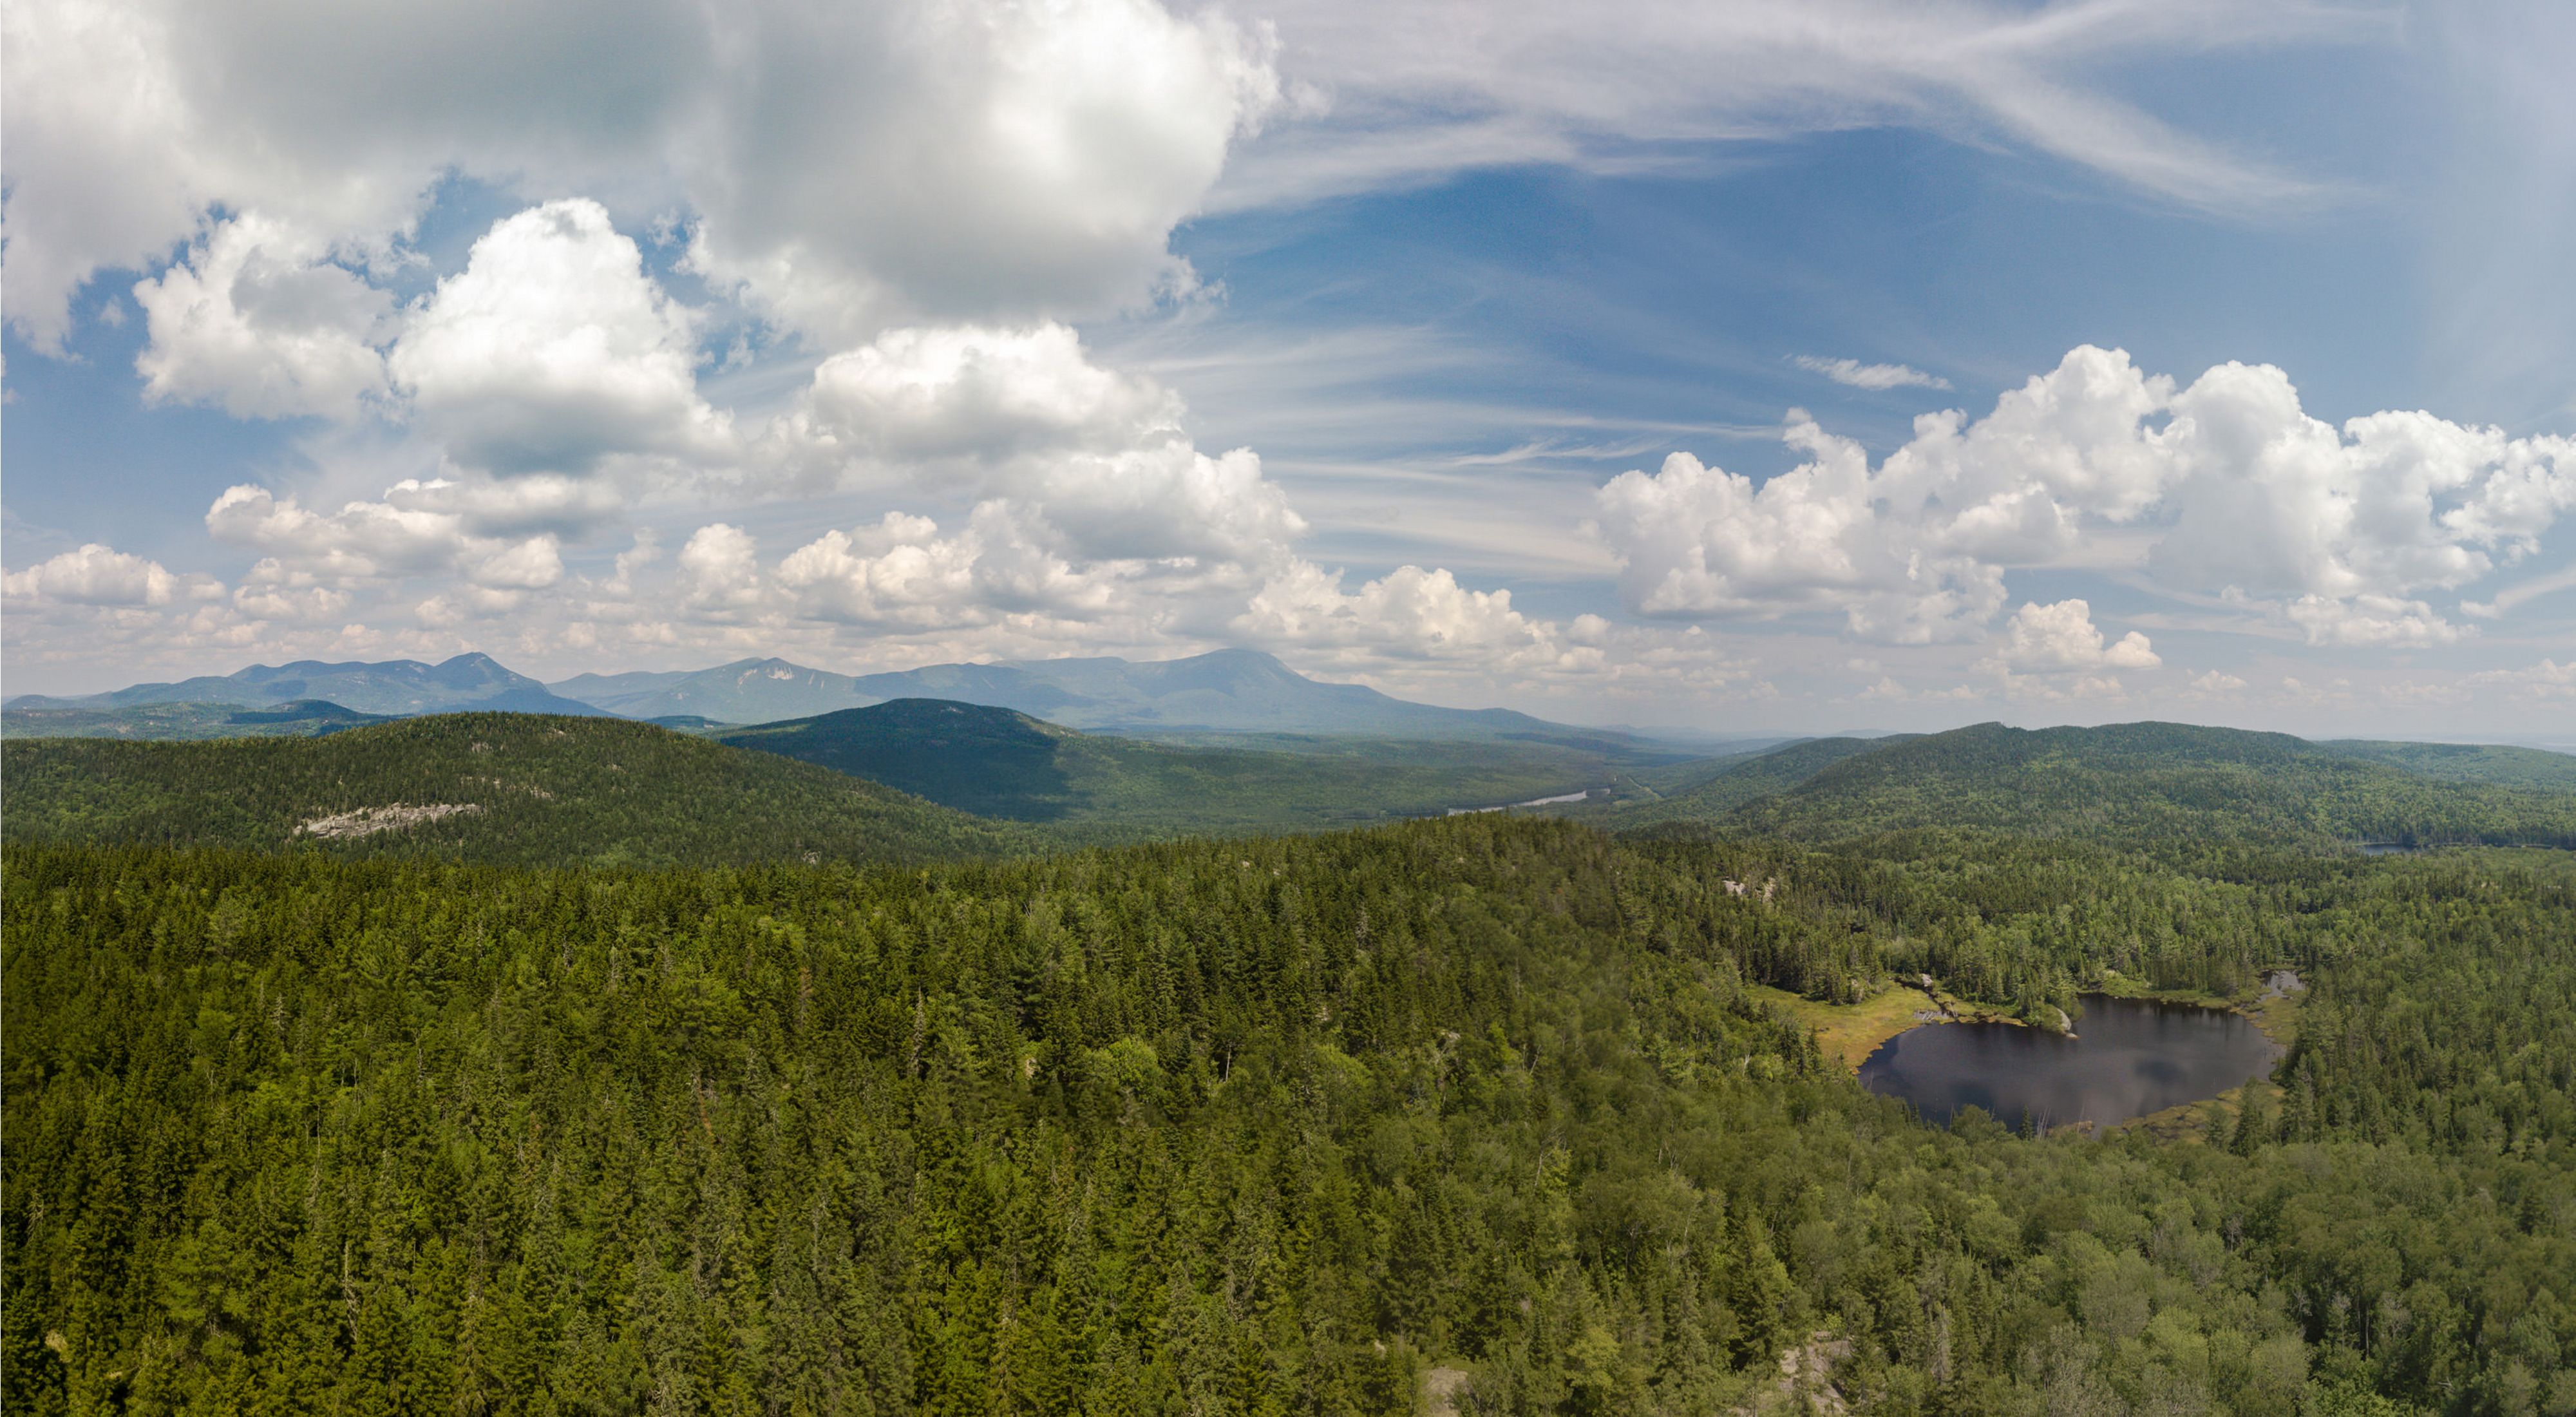 View of Mount Katahdin and surrounding forests.